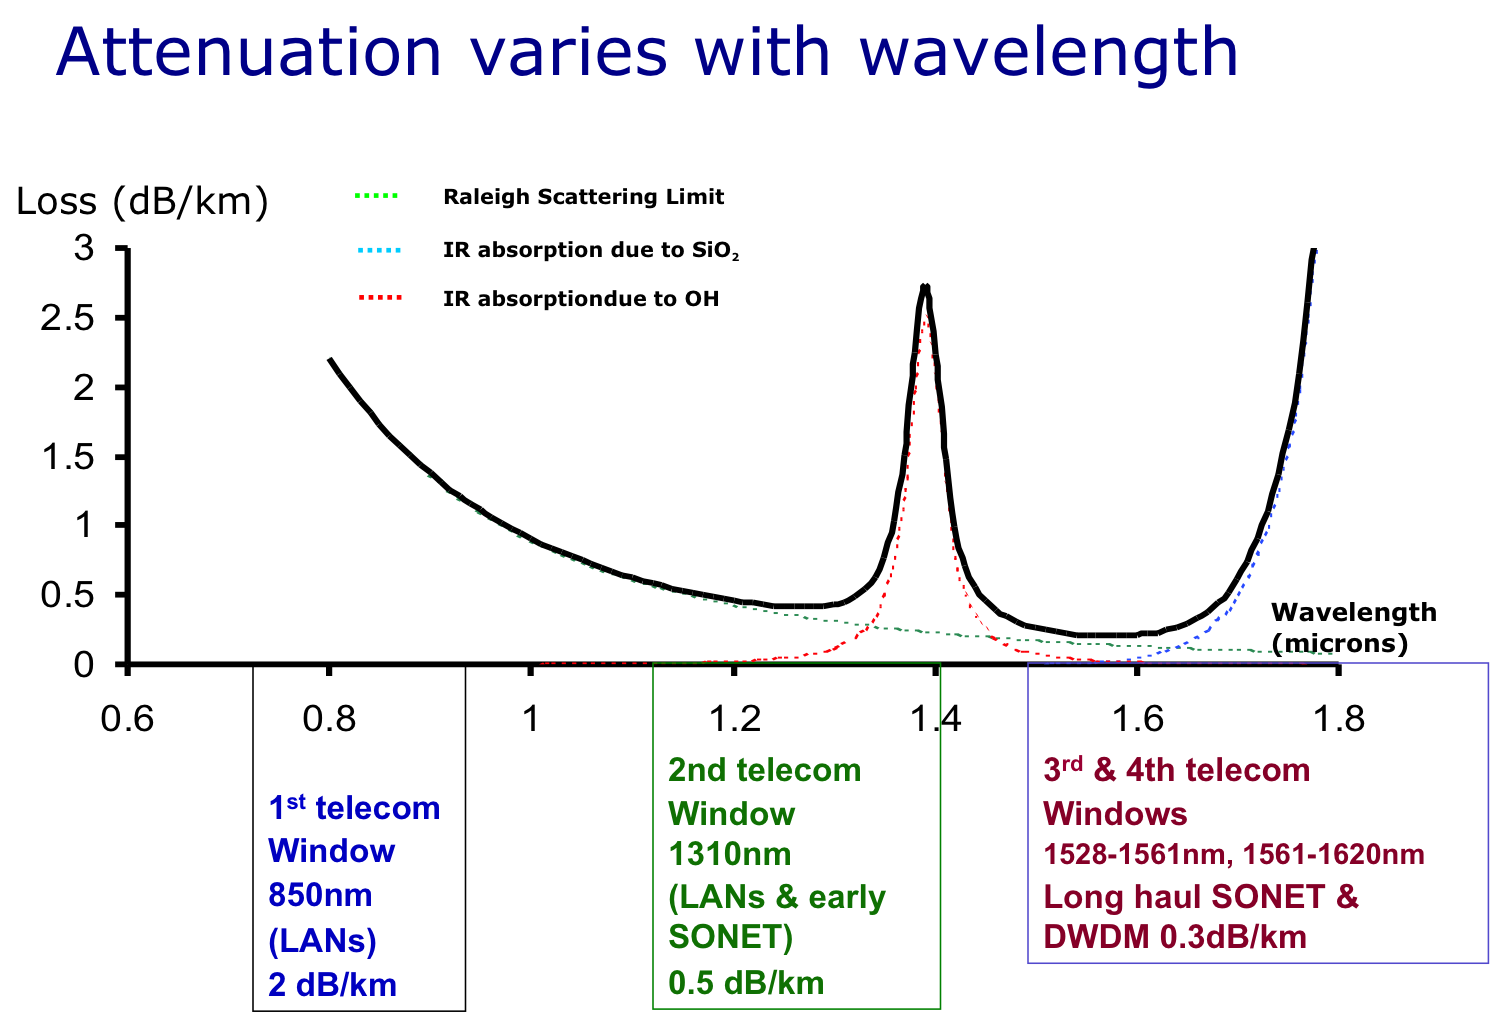 graphic shows an attenuation of an optical signal versus wavelength for an optical fiber cable